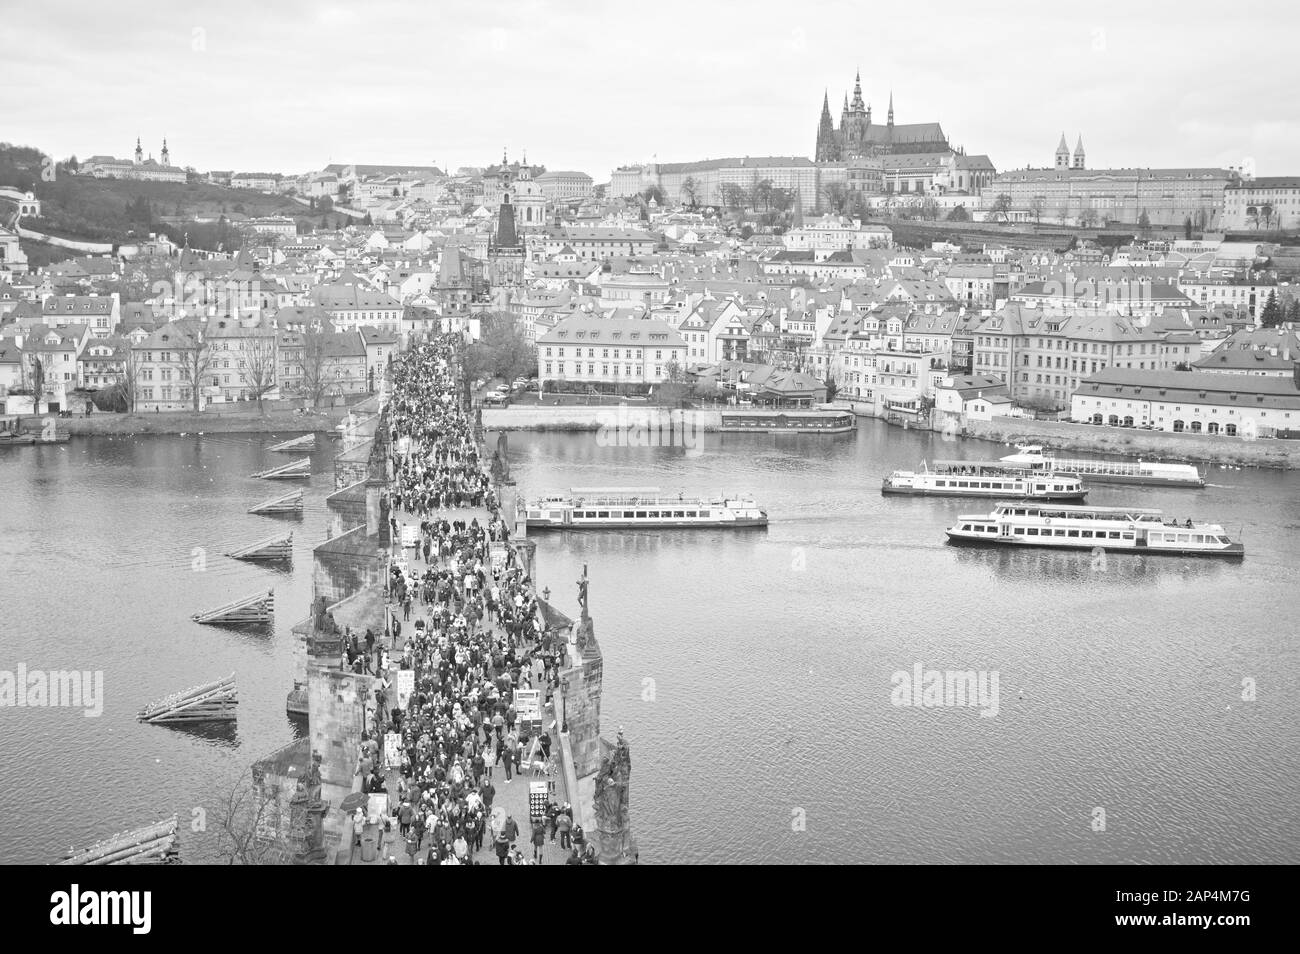 Prague, Czech Republic - 27 December 2019: panoramic view of the Charles Bridge, the Vltava River and the Castle of Prague from the tower Stock Photo